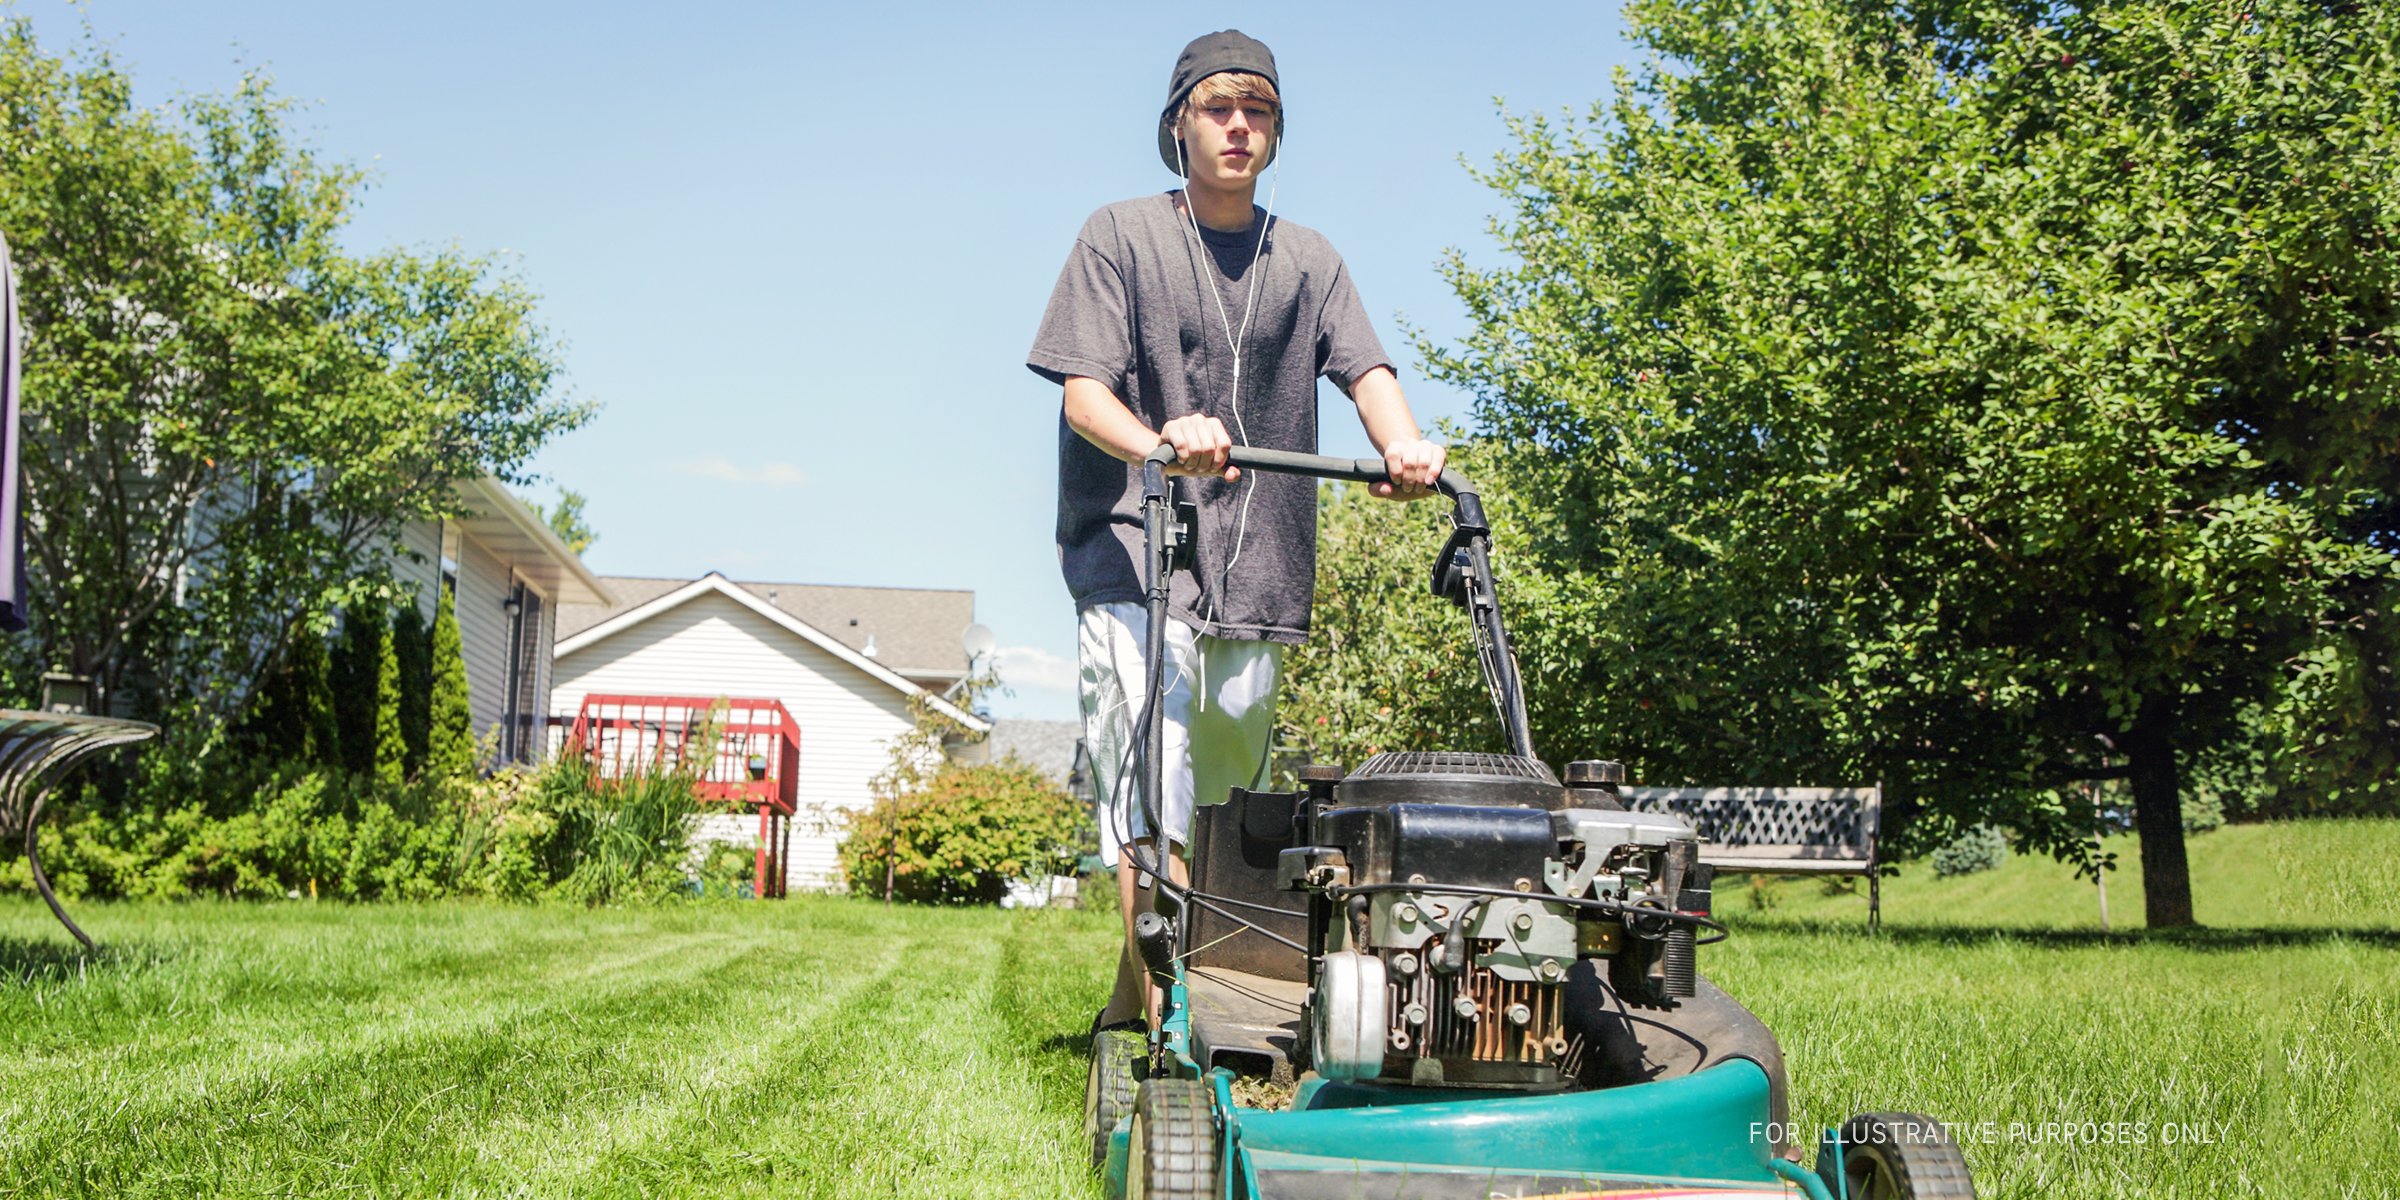 Teenager mowing the lawn. | Source: Shutterstock